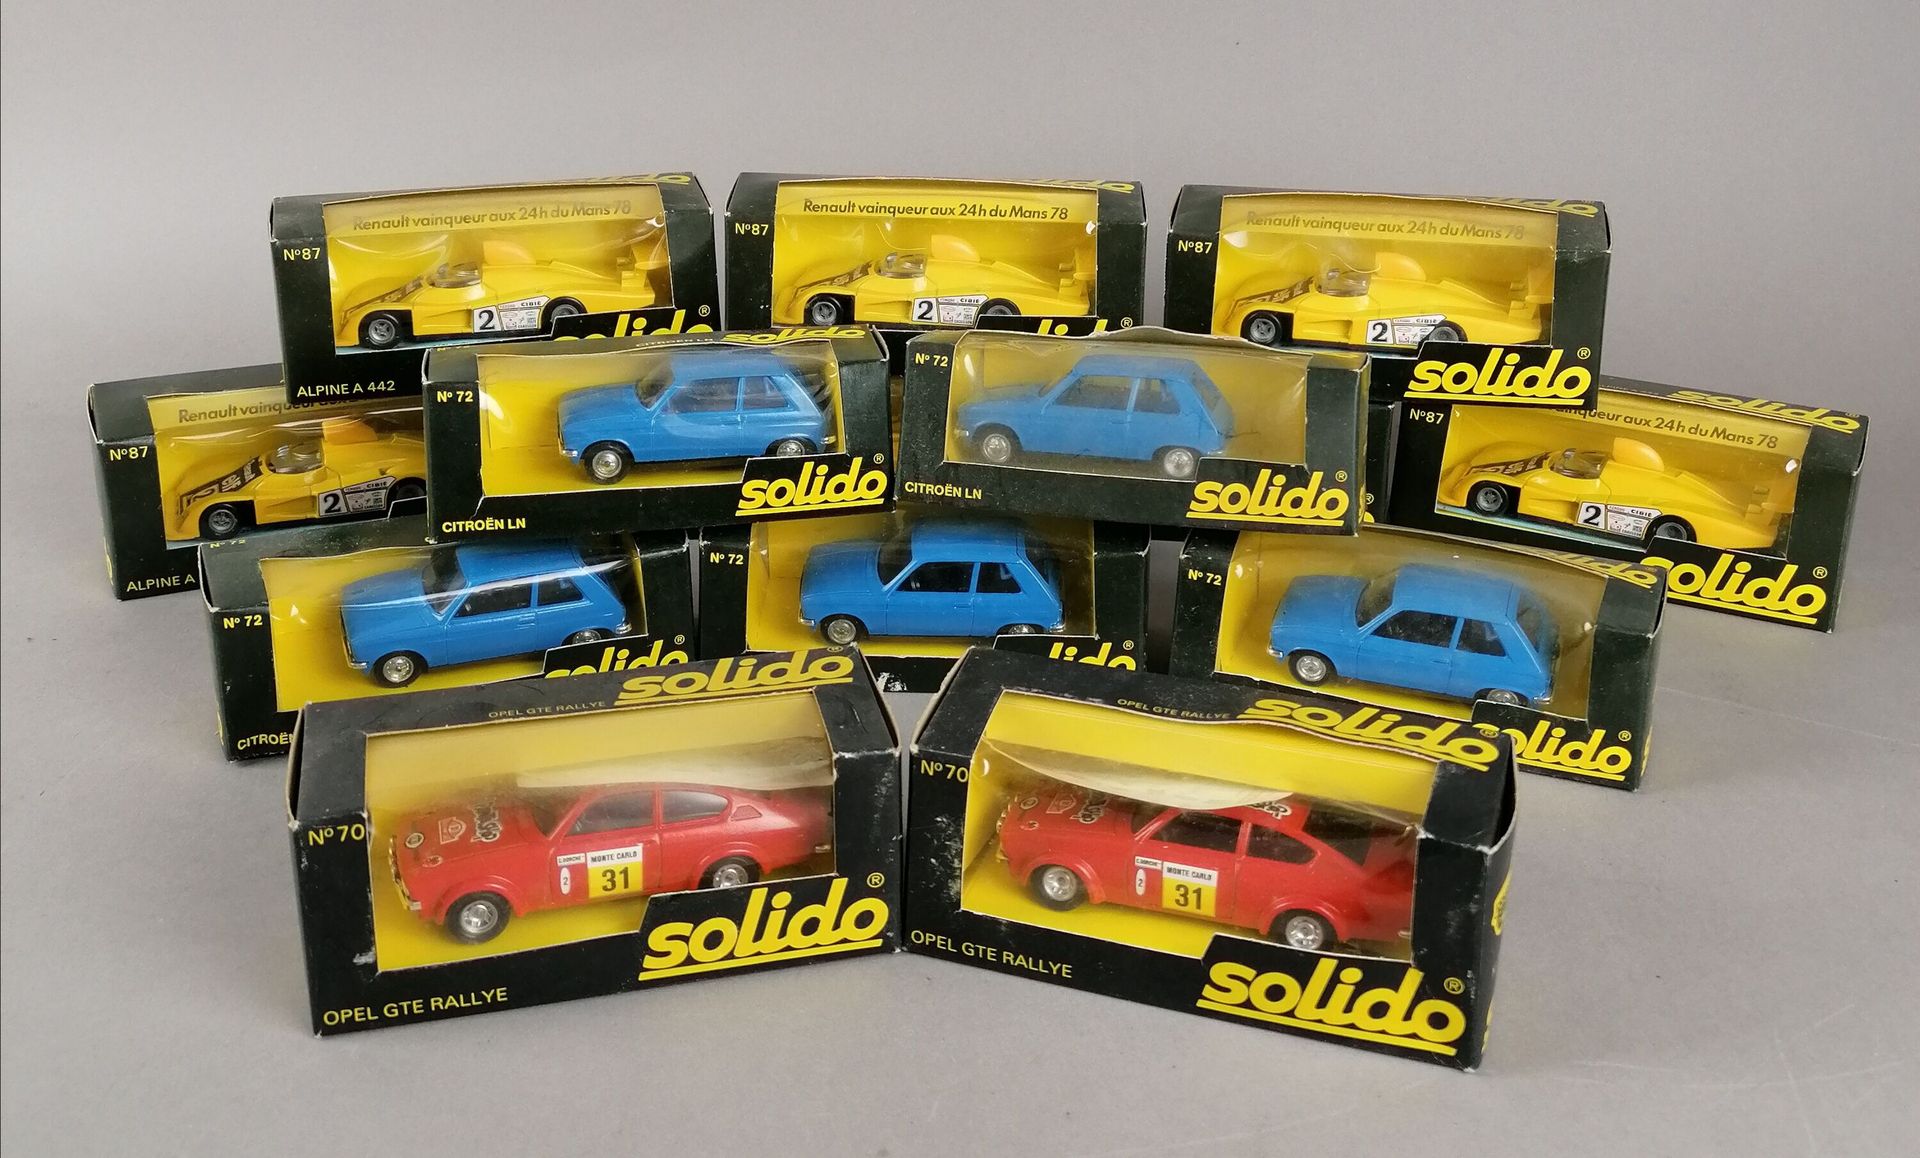 Null SOLIDO - 16 vehicles, scale 1/43 in their original boxes :

9x Alpine A 442&hellip;